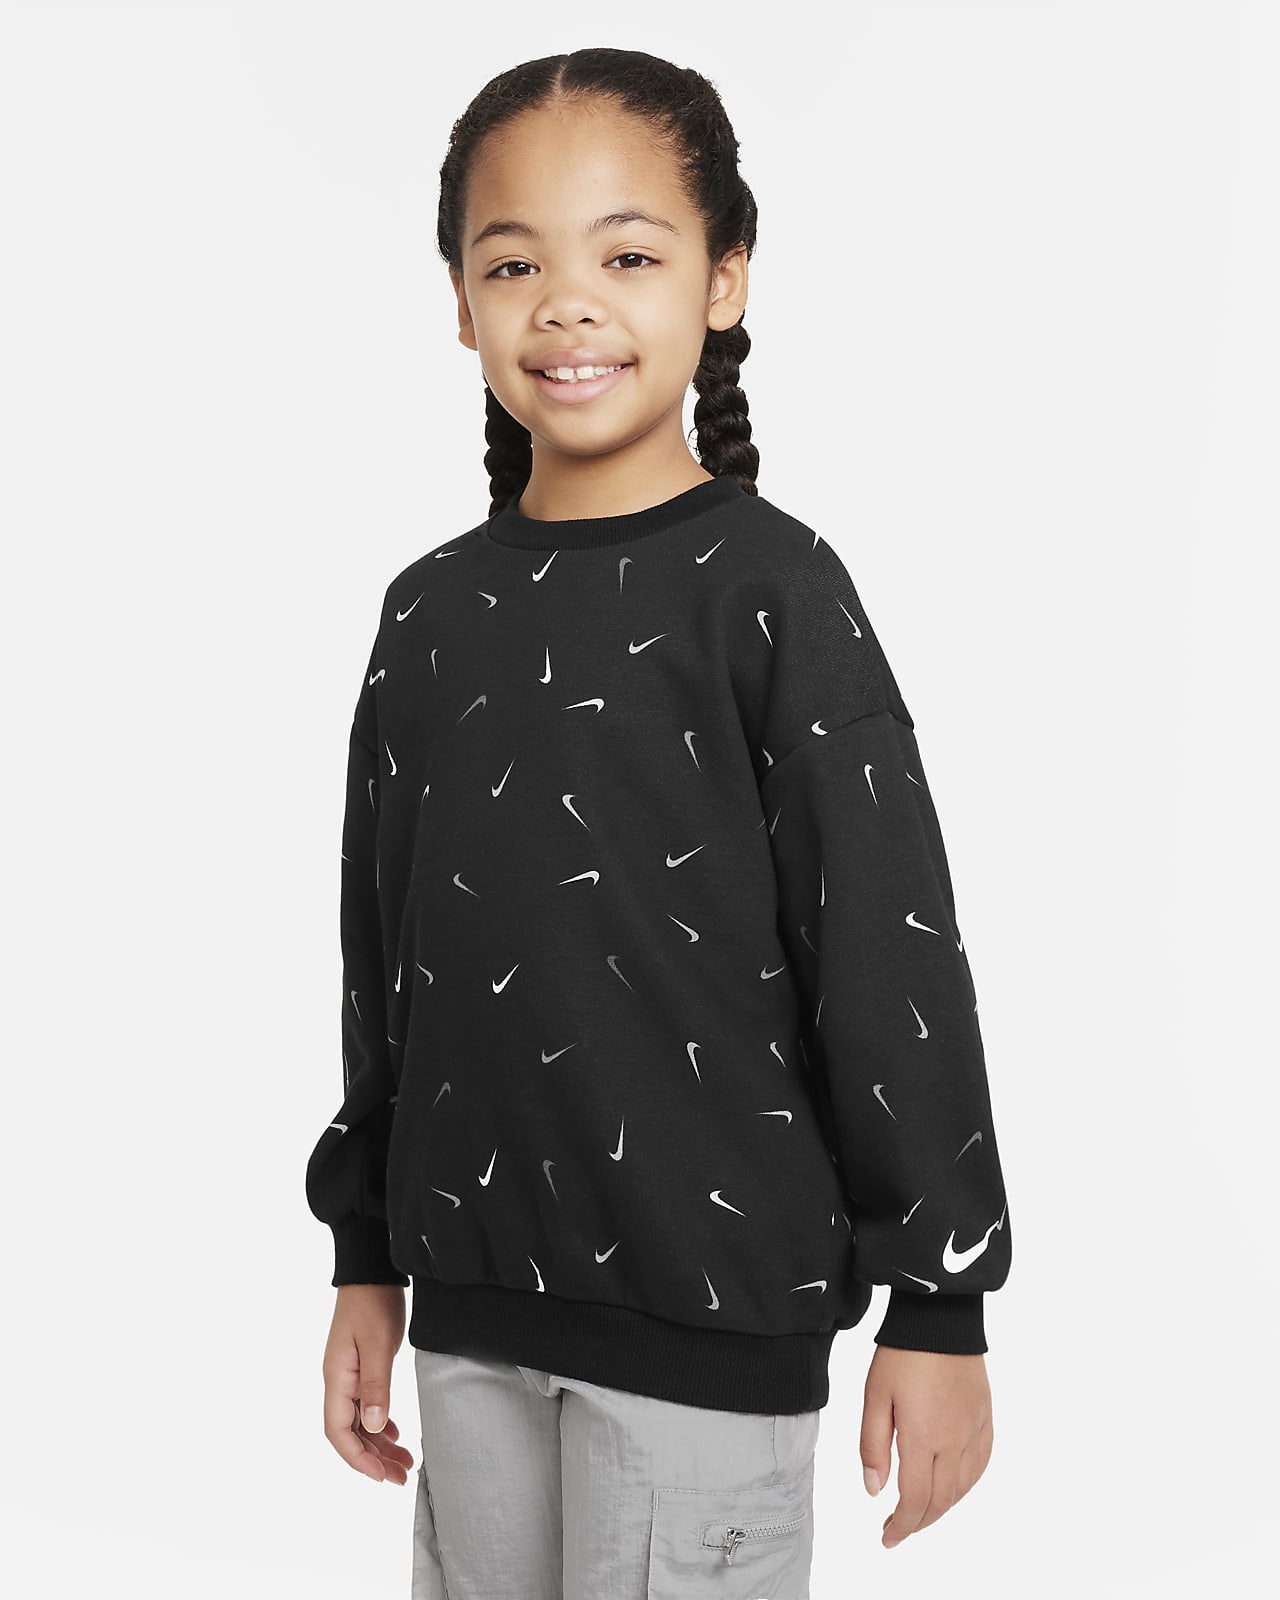 Nike Snack Pack Icon Crew Little Kids' Top